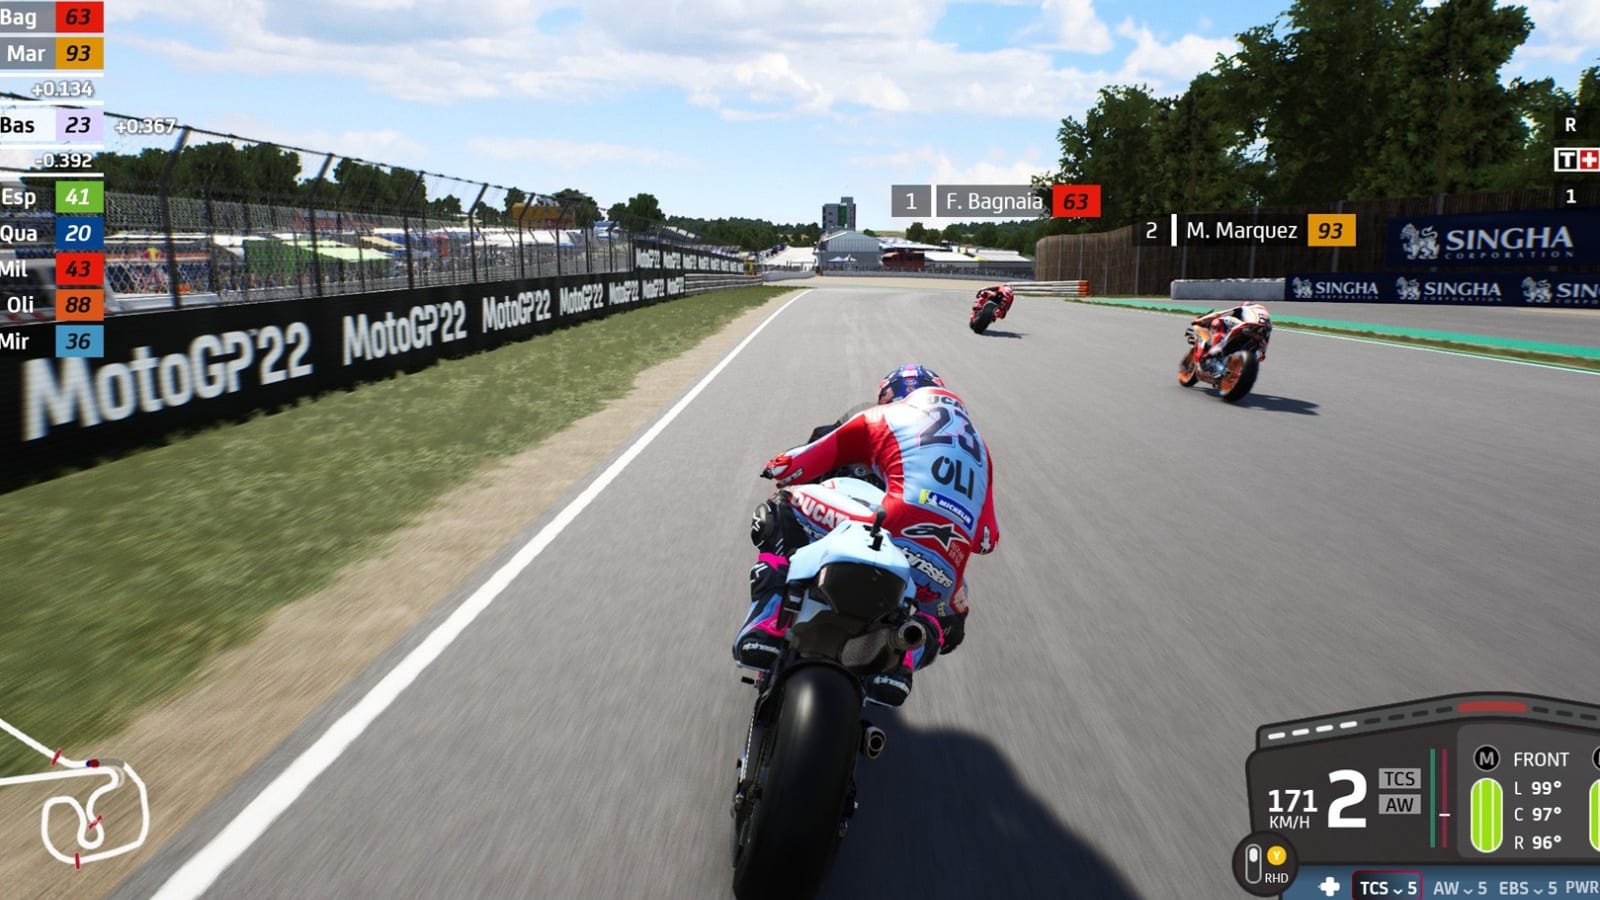 MotoGP 22 review A sim racer with a steep learning curve